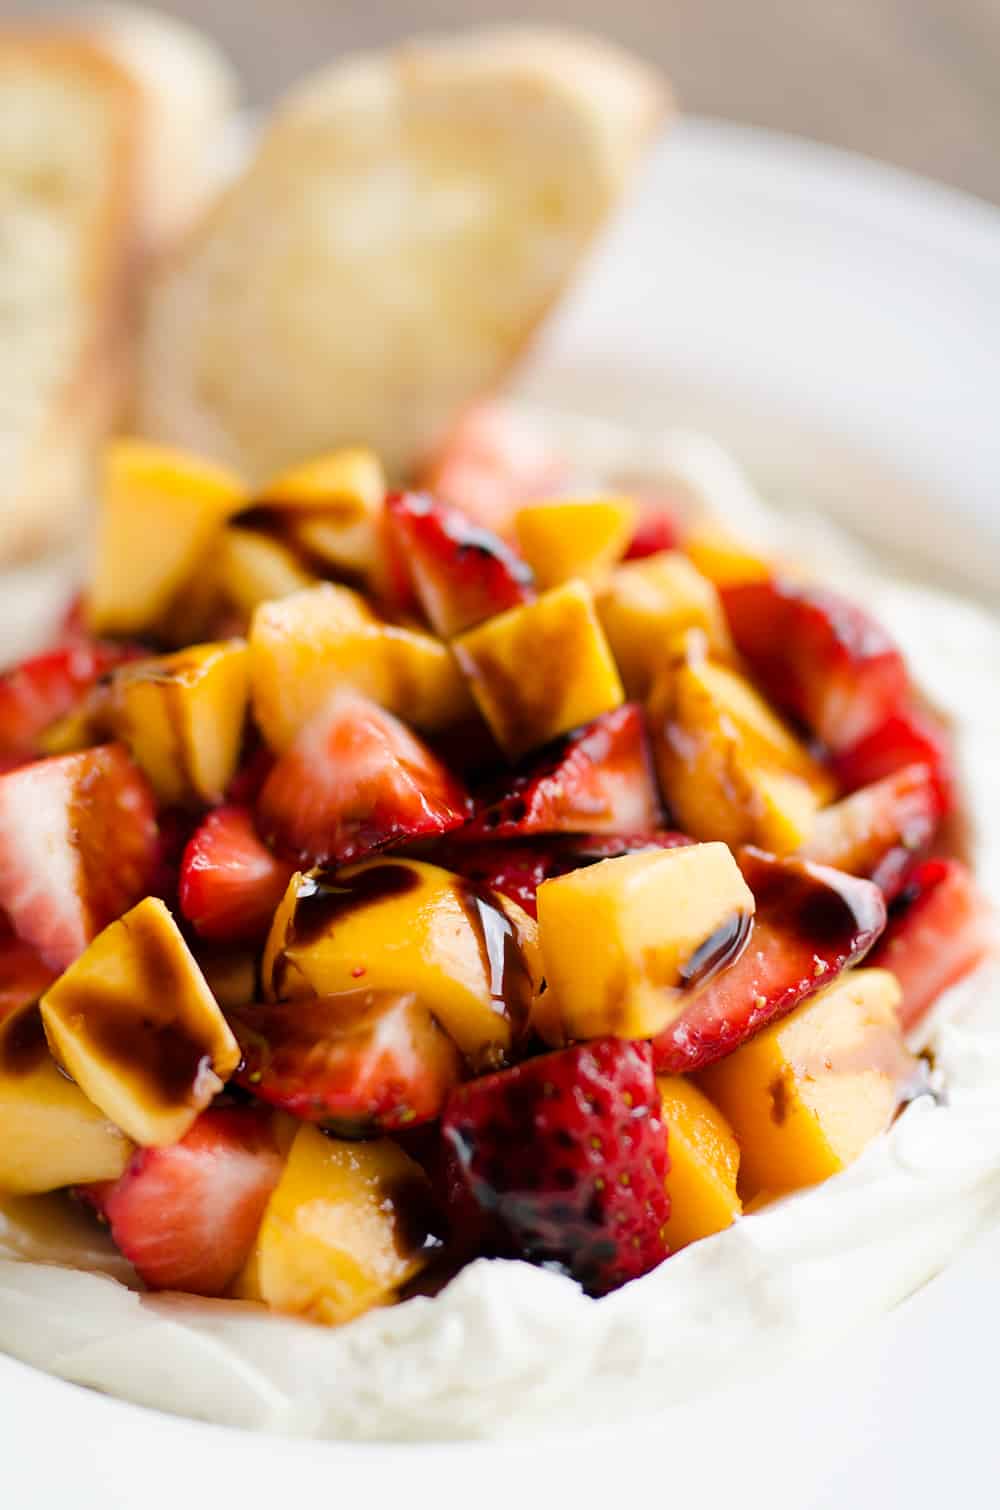 Whipped Honey Goat Cheese Dip with Balsamic Fruit 